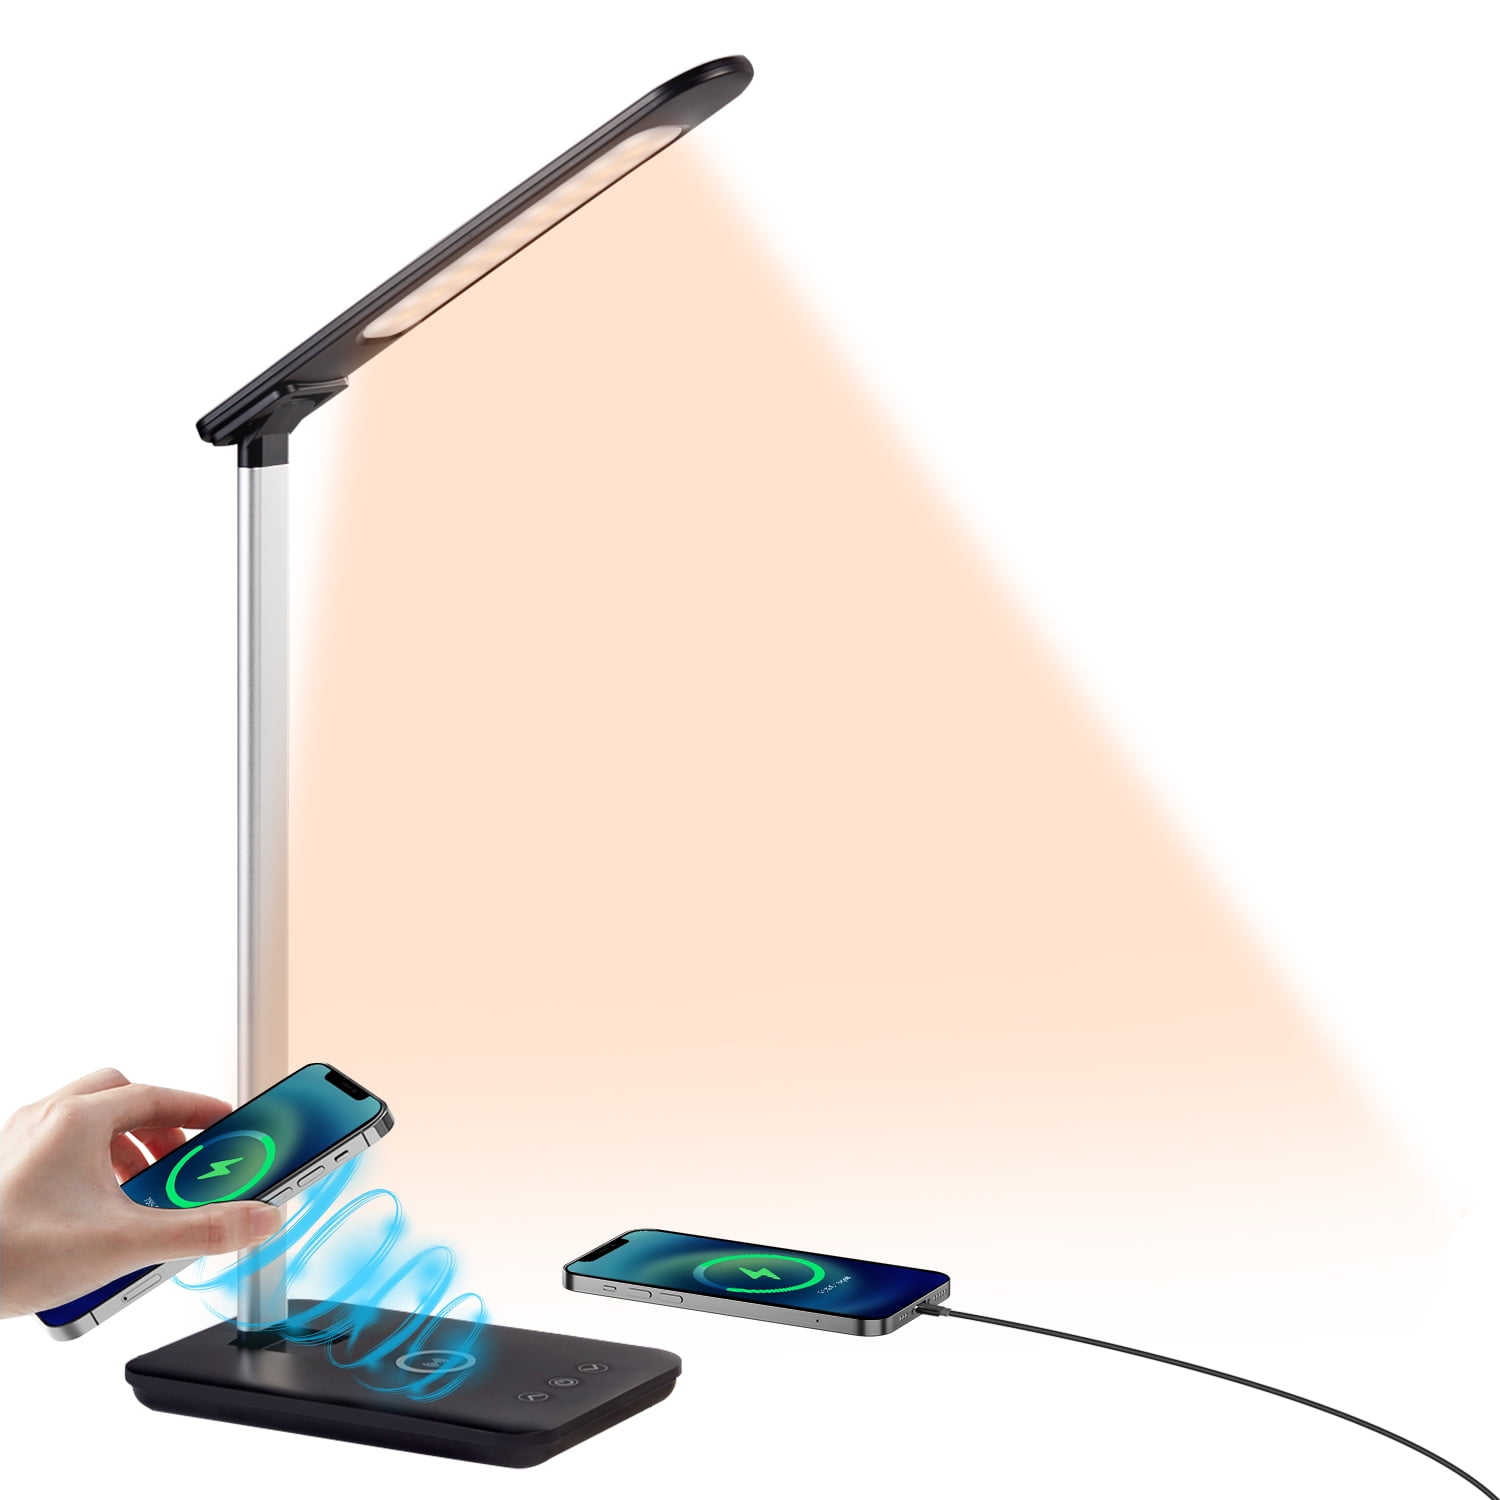 OttLite Executive Desk Lamp with 2.1A USB Charging Port – RJP Unlimited